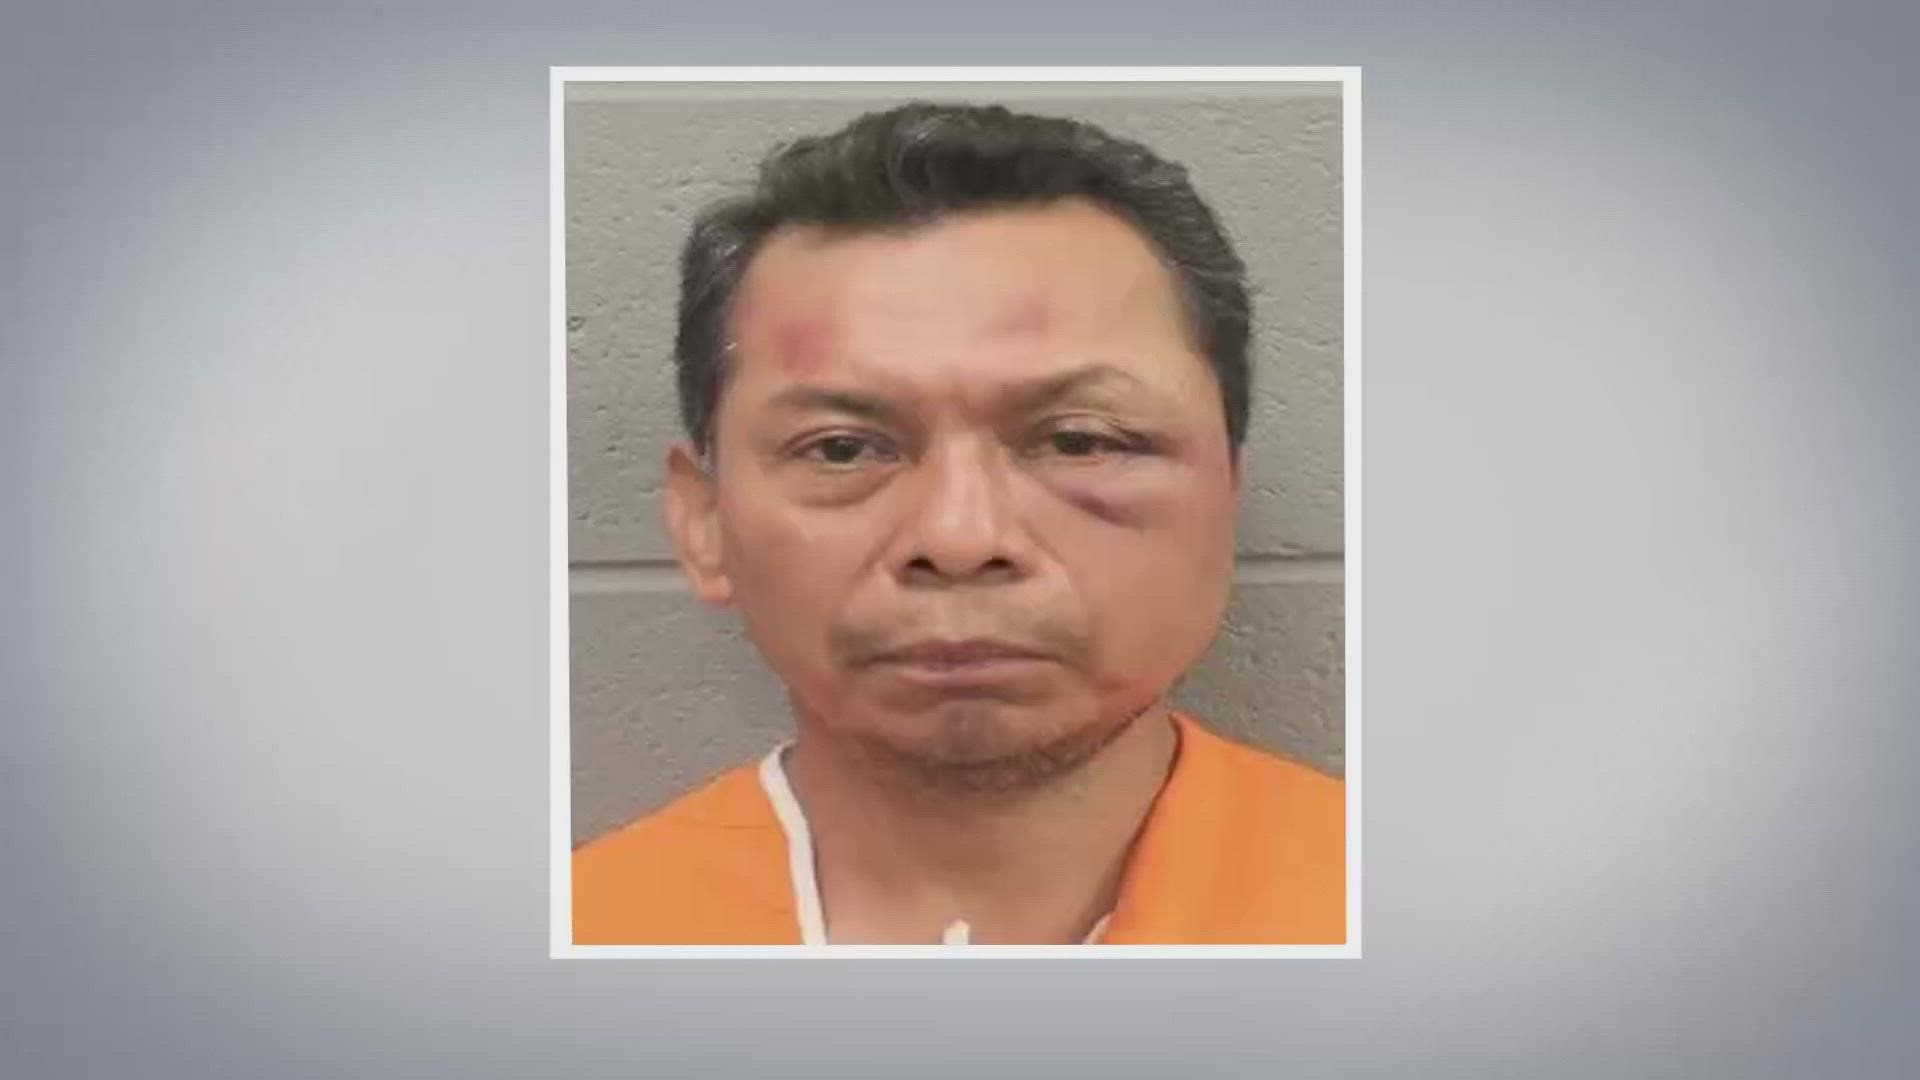 Holman Hernandez appeared in court Monday afternoon. He was arrested Sunday after police said they found him in a northside motel room with the little girl.